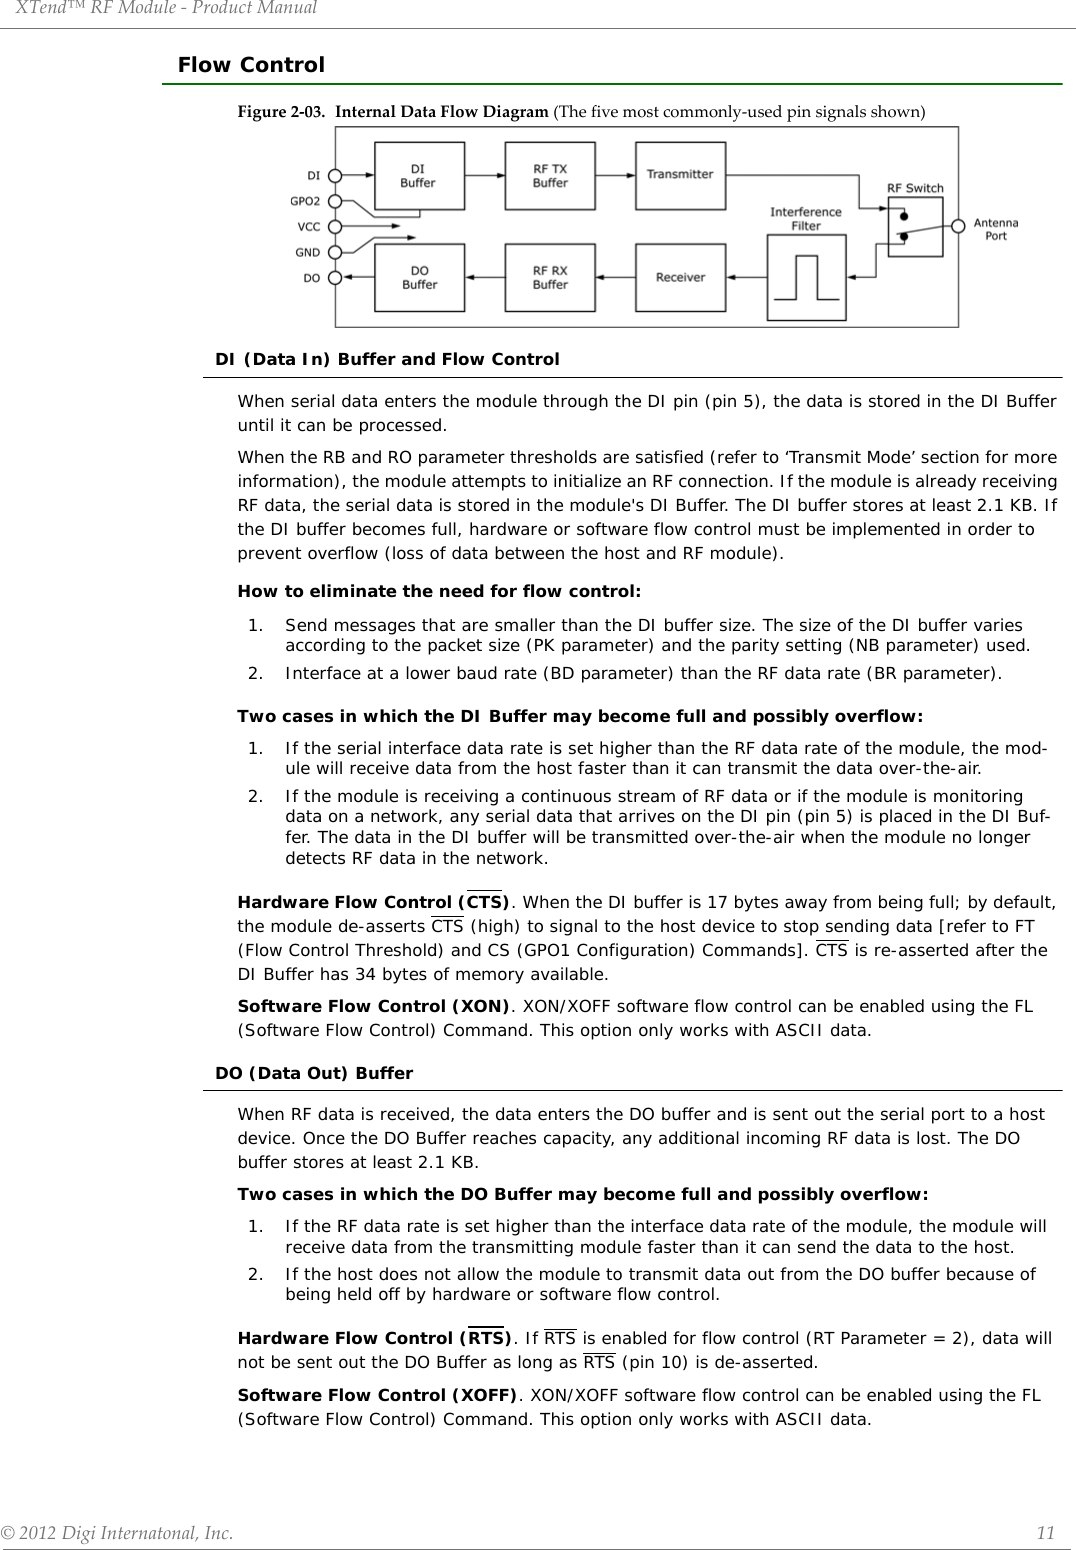 XTend™ RF Module - Product Manual © 2012 Digi Internatonal, Inc.      11Flow ControlFigure 2-03. Internal Data Flow Diagram (The five most commonly-used pin signals shown)DI (Data In) Buffer and Flow ControlWhen serial data enters the module through the DI pin (pin 5), the data is stored in the DI Buffer until it can be processed.When the RB and RO parameter thresholds are satisfied (refer to ‘Transmit Mode’ section for more information), the module attempts to initialize an RF connection. If the module is already receiving RF data, the serial data is stored in the module&apos;s DI Buffer. The DI buffer stores at least 2.1 KB. If the DI buffer becomes full, hardware or software flow control must be implemented in order to prevent overflow (loss of data between the host and RF module).How to eliminate the need for flow control:Two cases in which the DI Buffer may become full and possibly overflow:Hardware Flow Control (CTS). When the DI buffer is 17 bytes away from being full; by default, the module de-asserts CTS (high) to signal to the host device to stop sending data [refer to FT (Flow Control Threshold) and CS (GPO1 Configuration) Commands]. CTS is re-asserted after the DI Buffer has 34 bytes of memory available.Software Flow Control (XON). XON/XOFF software flow control can be enabled using the FL (Software Flow Control) Command. This option only works with ASCII data.DO (Data Out) BufferWhen RF data is received, the data enters the DO buffer and is sent out the serial port to a host device. Once the DO Buffer reaches capacity, any additional incoming RF data is lost. The DO buffer stores at least 2.1 KB.Two cases in which the DO Buffer may become full and possibly overflow:Hardware Flow Control (RTS). If RTS is enabled for flow control (RT Parameter = 2), data will not be sent out the DO Buffer as long as RTS (pin 10) is de-asserted. Software Flow Control (XOFF). XON/XOFF software flow control can be enabled using the FL (Software Flow Control) Command. This option only works with ASCII data.1.  Send messages that are smaller than the DI buffer size. The size of the DI buffer varies according to the packet size (PK parameter) and the parity setting (NB parameter) used.2.  Interface at a lower baud rate (BD parameter) than the RF data rate (BR parameter).1.  If the serial interface data rate is set higher than the RF data rate of the module, the mod-ule will receive data from the host faster than it can transmit the data over-the-air.2.  If the module is receiving a continuous stream of RF data or if the module is monitoring data on a network, any serial data that arrives on the DI pin (pin 5) is placed in the DI Buf-fer. The data in the DI buffer will be transmitted over-the-air when the module no longer detects RF data in the network.1.  If the RF data rate is set higher than the interface data rate of the module, the module will receive data from the transmitting module faster than it can send the data to the host.2. If the host does not allow the module to transmit data out from the DO buffer because of being held off by hardware or software flow control.